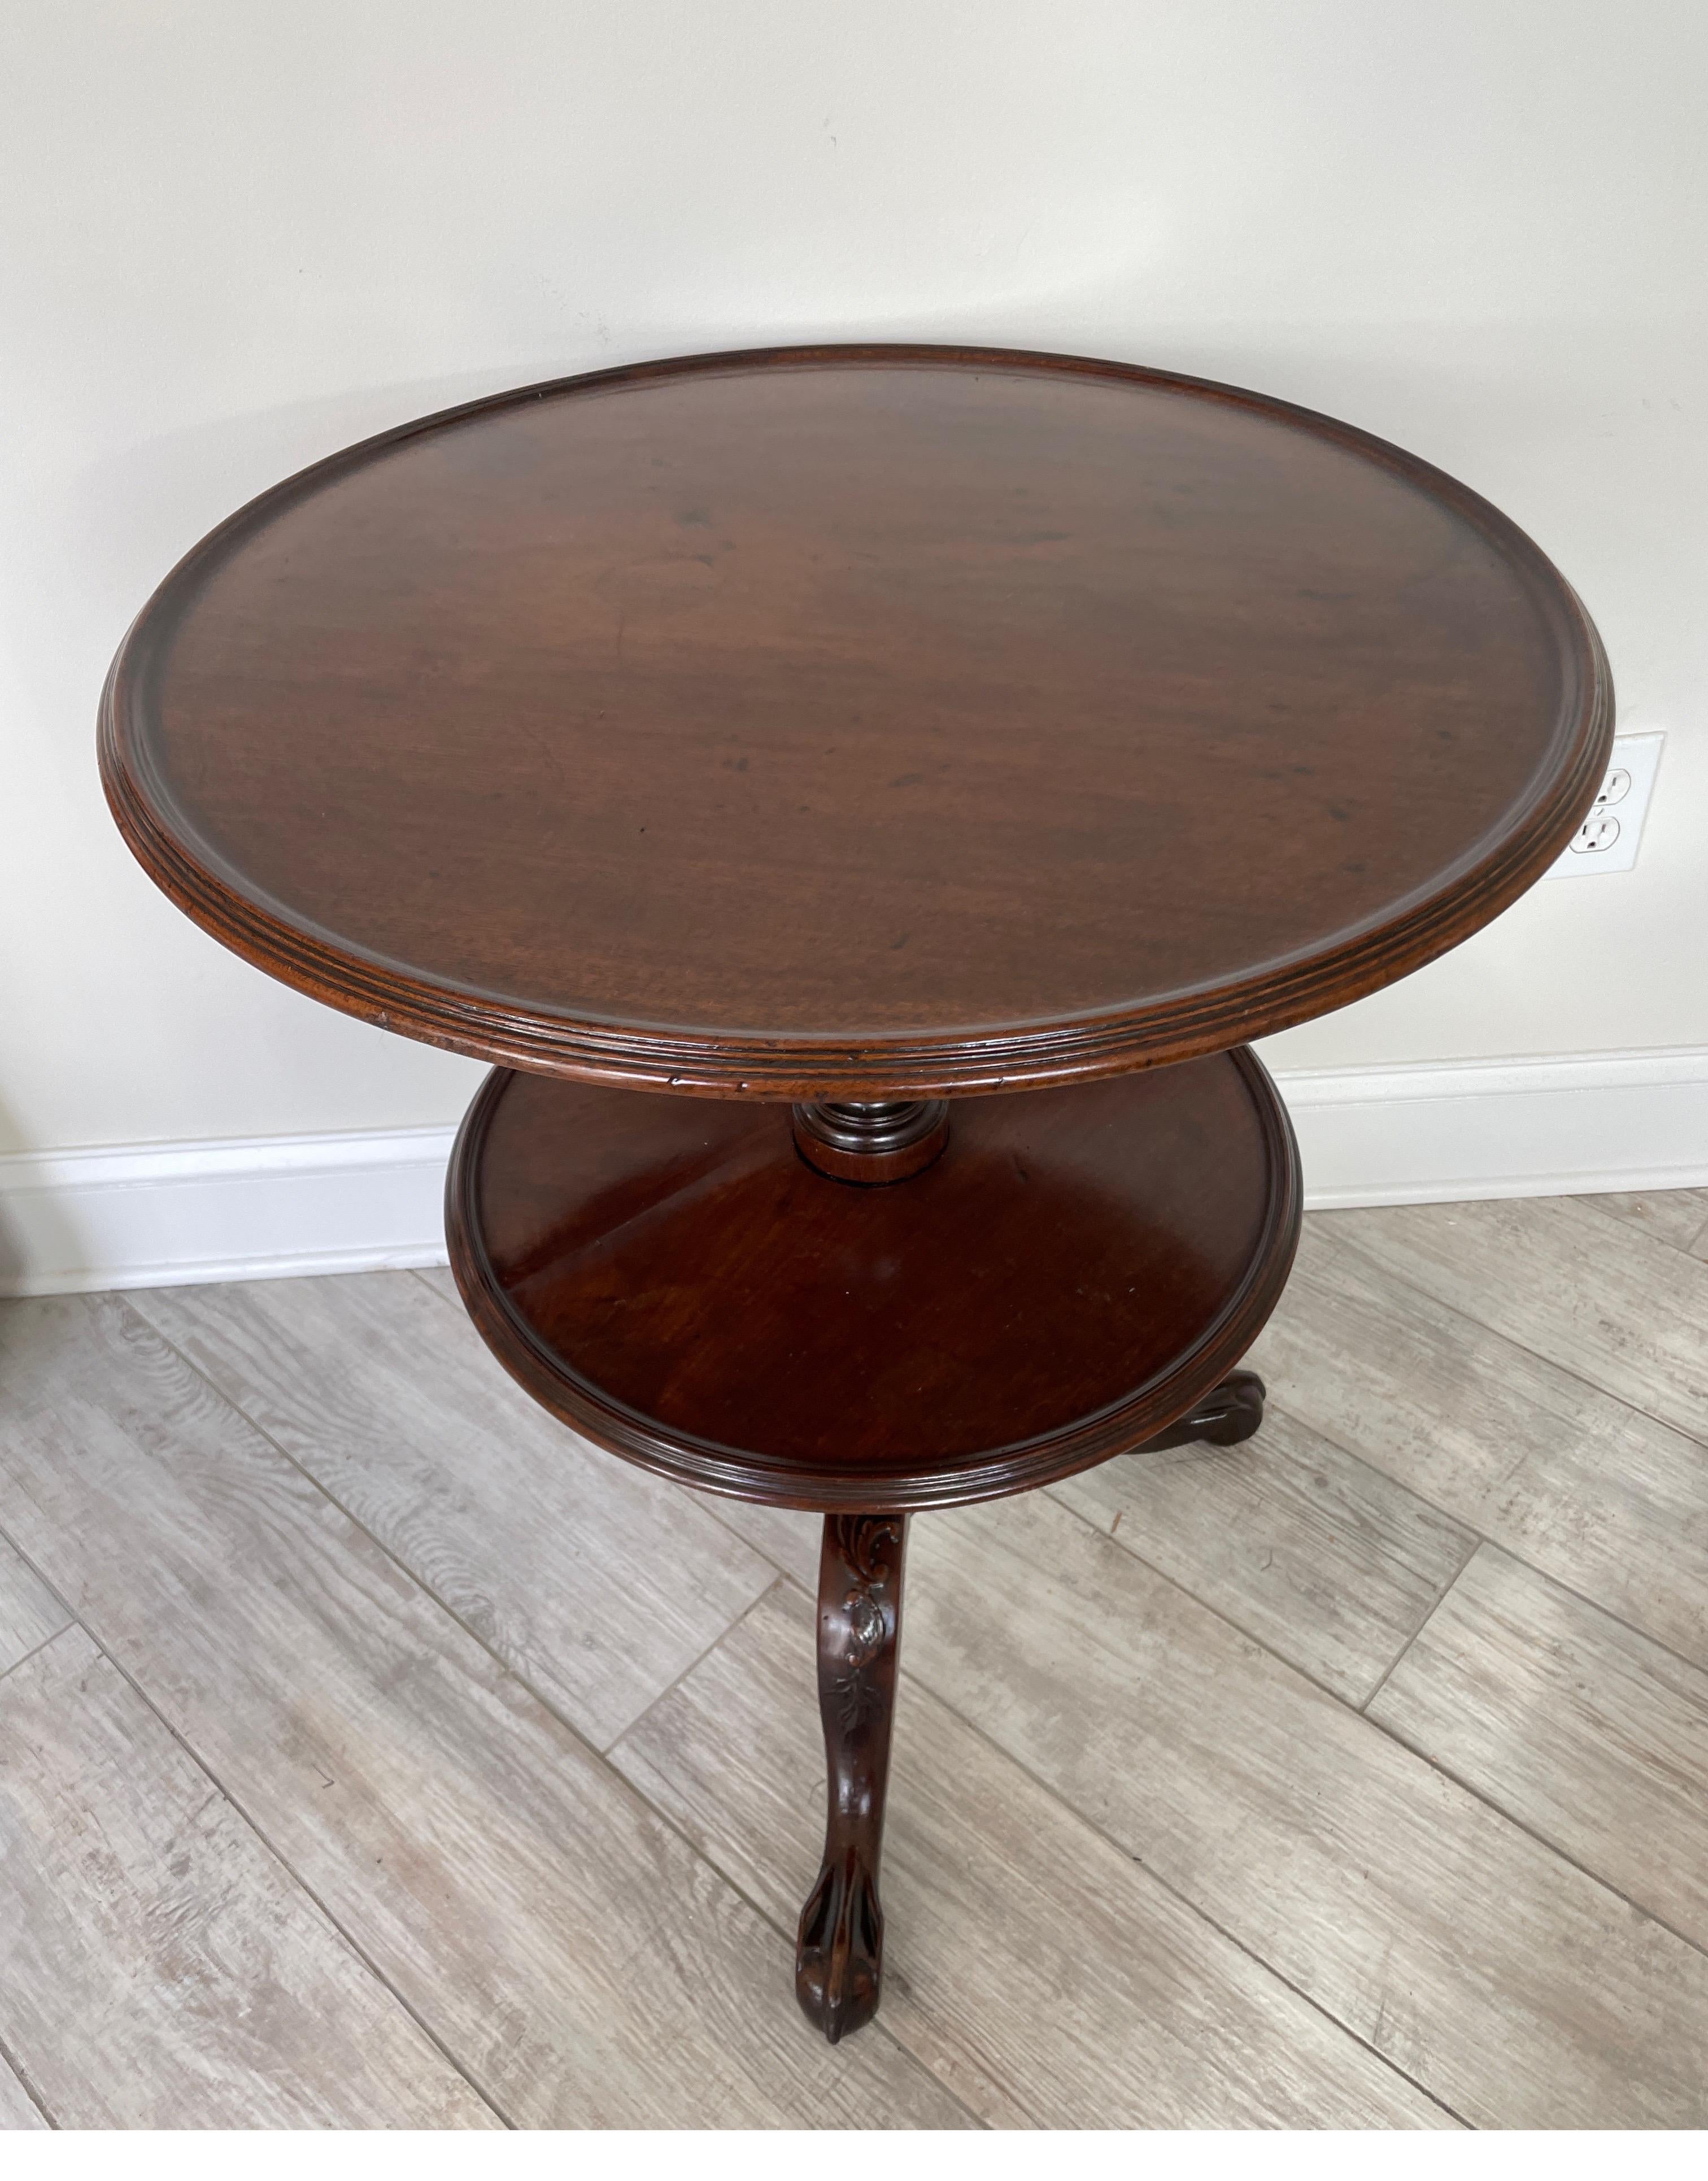 Antique two tiered English lazy Susan side table. The top tier which revolves is the larger of the two. A very fine & unique piece.